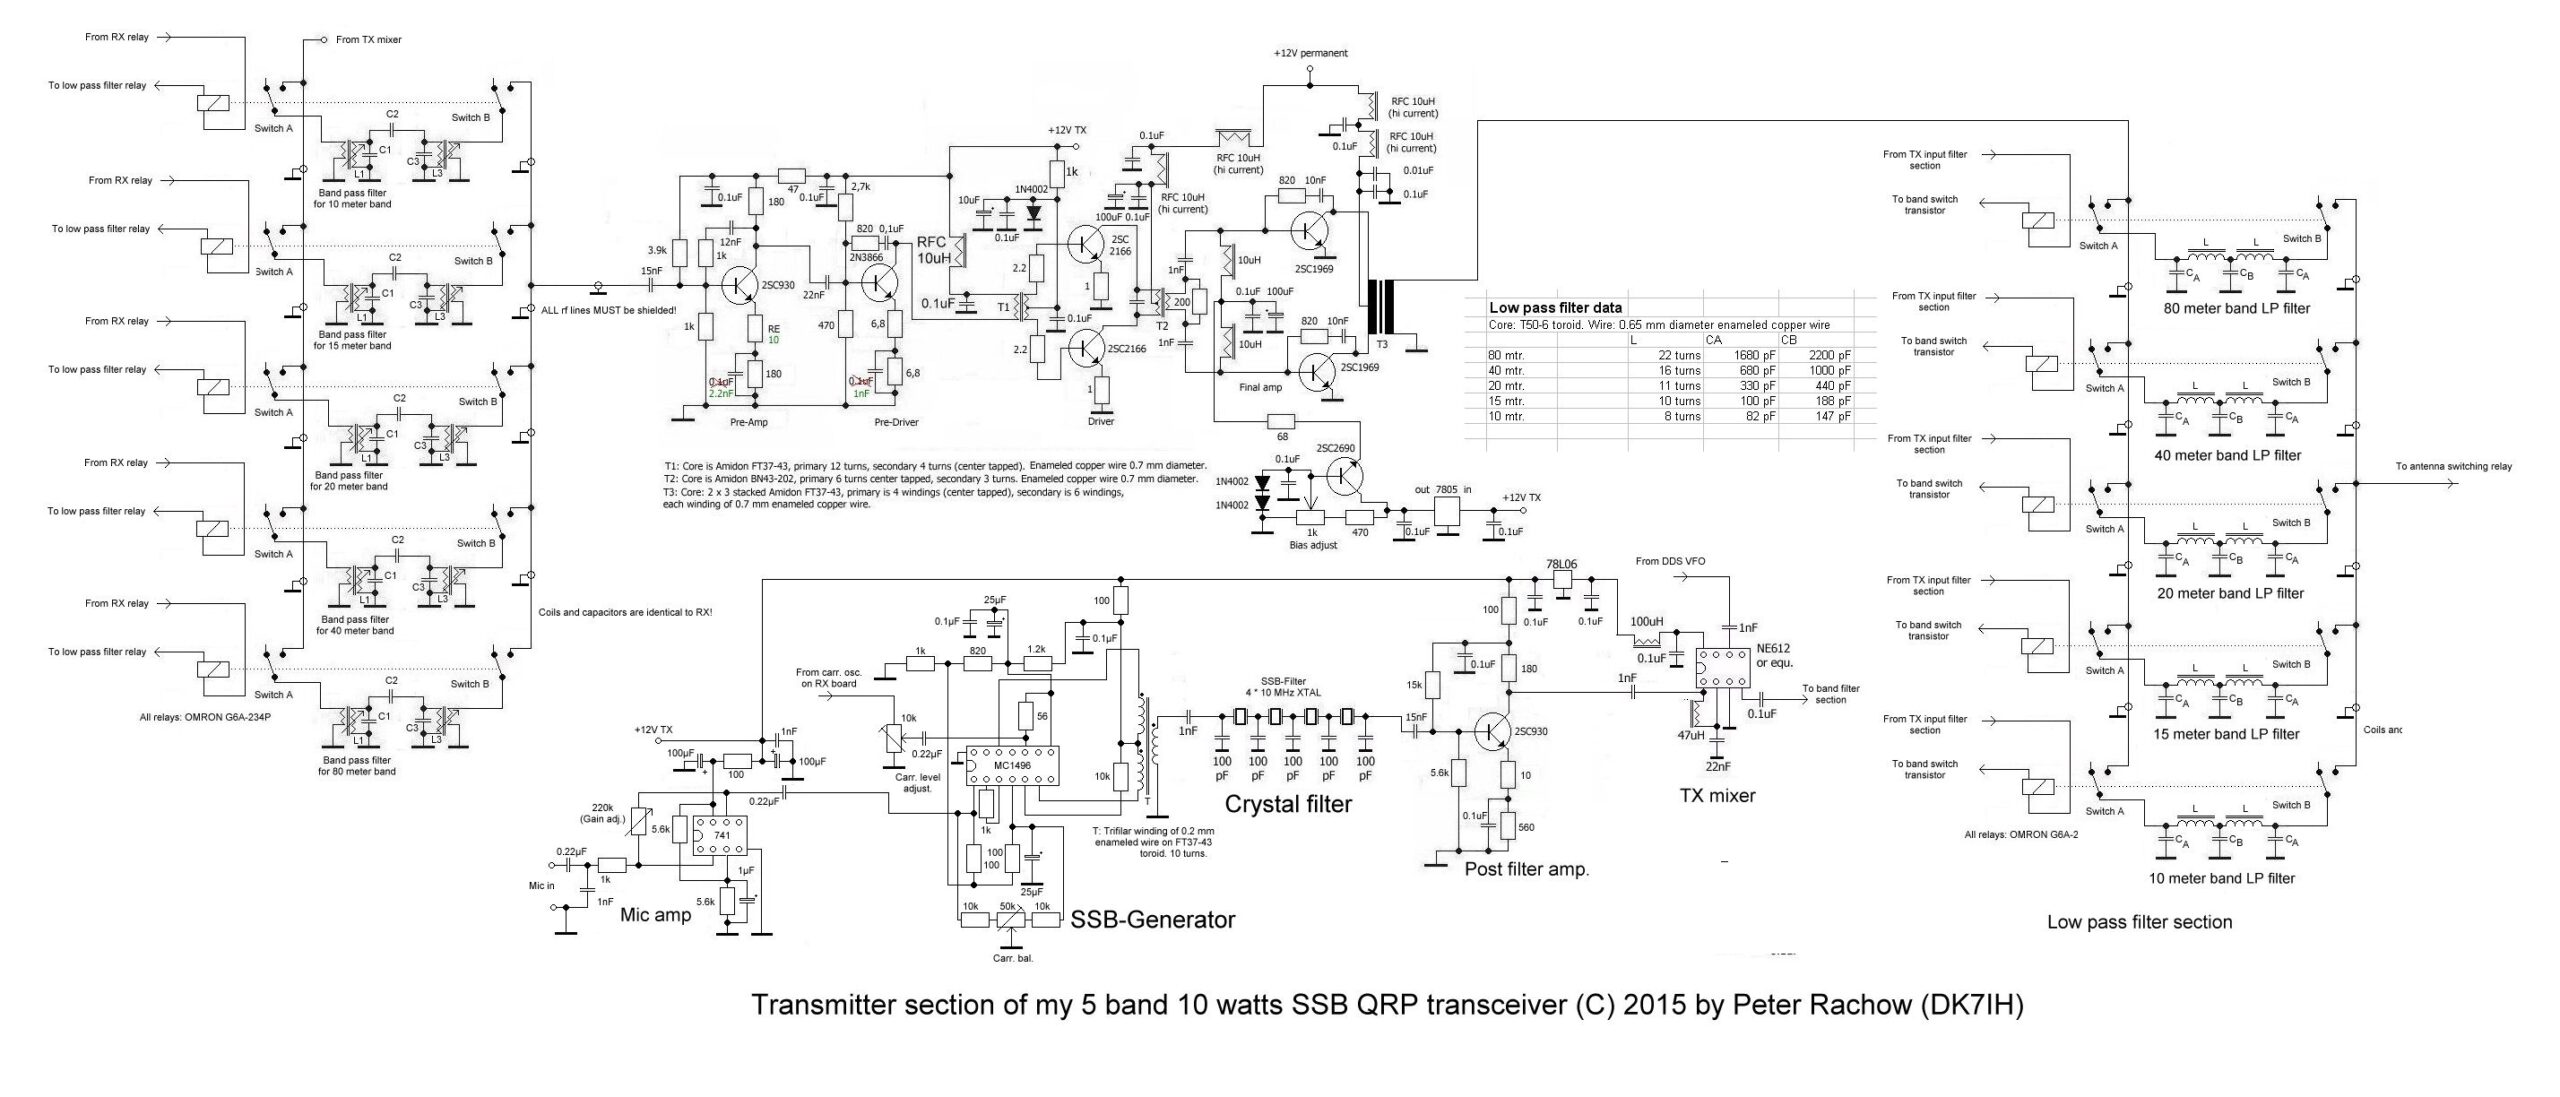 A 5 bands 10 Watts multi band SSQ QRP transceiver: The full transmitter section including broadband linear amplifier from 3 to 30 MHz (C) Peter Rachow (DK7IH) 2015